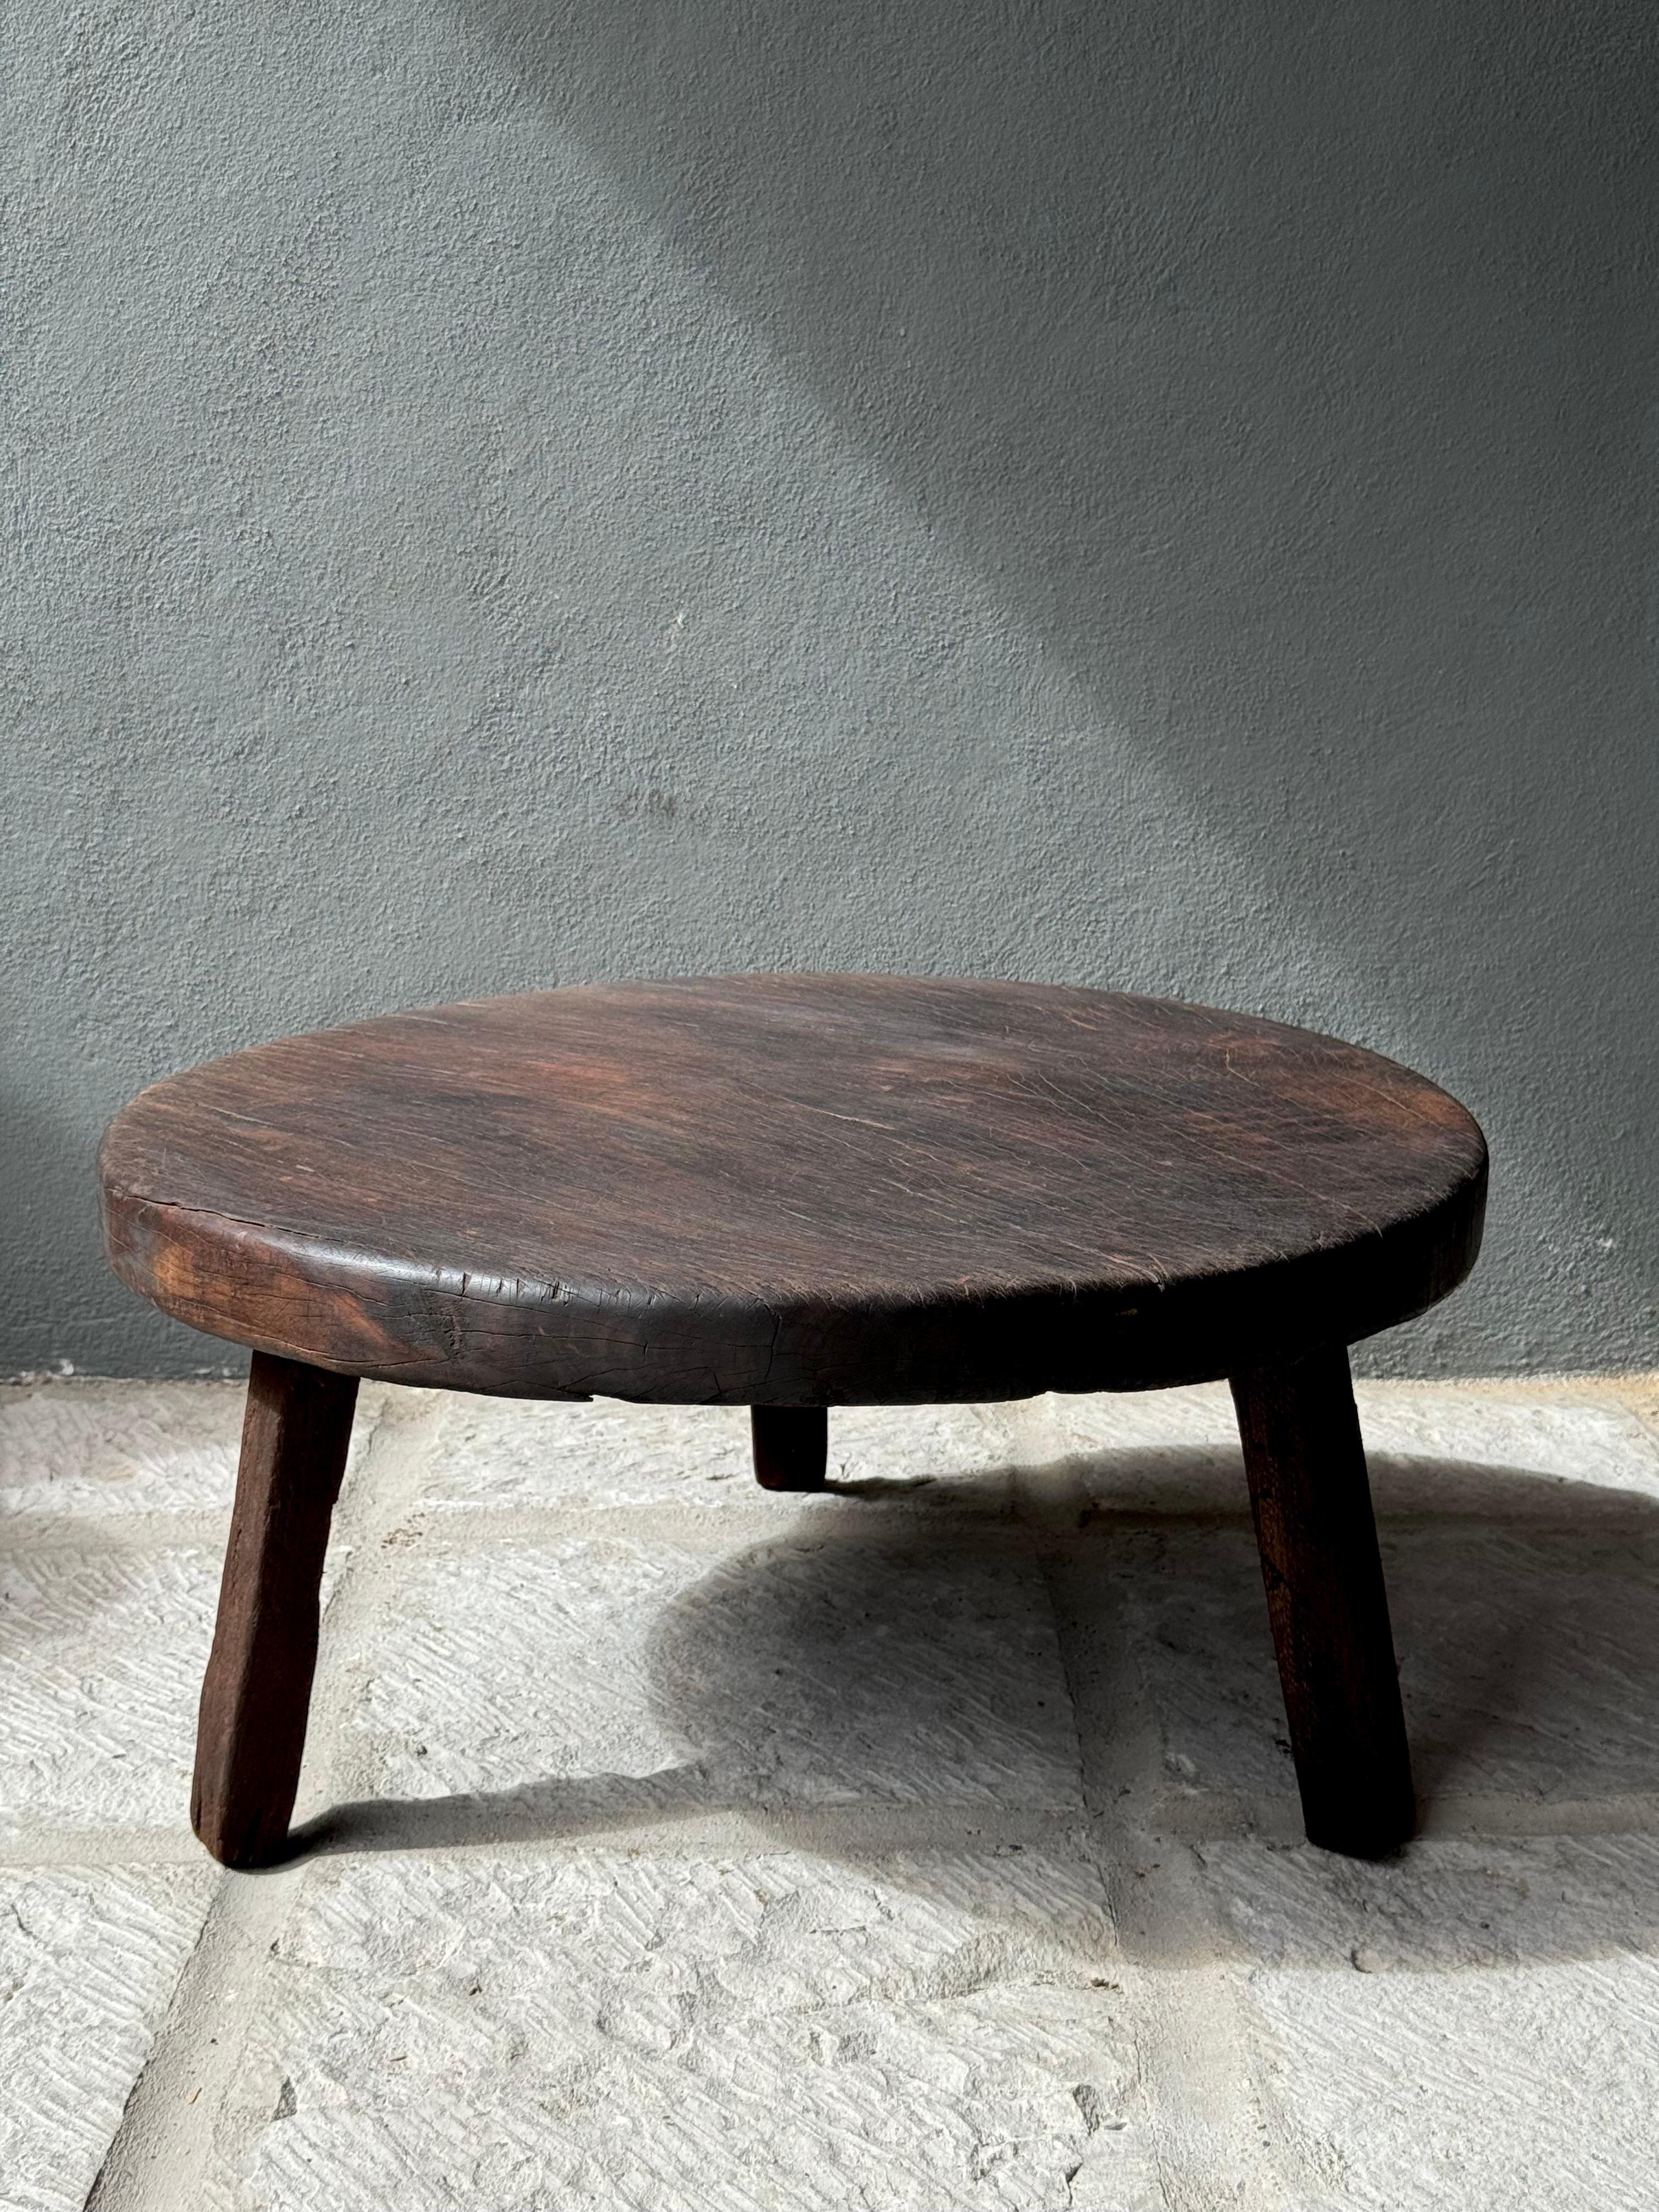 Primitive Hardwood Round Table From Central Yucatan, Mexico, Mid 20th Century For Sale 2